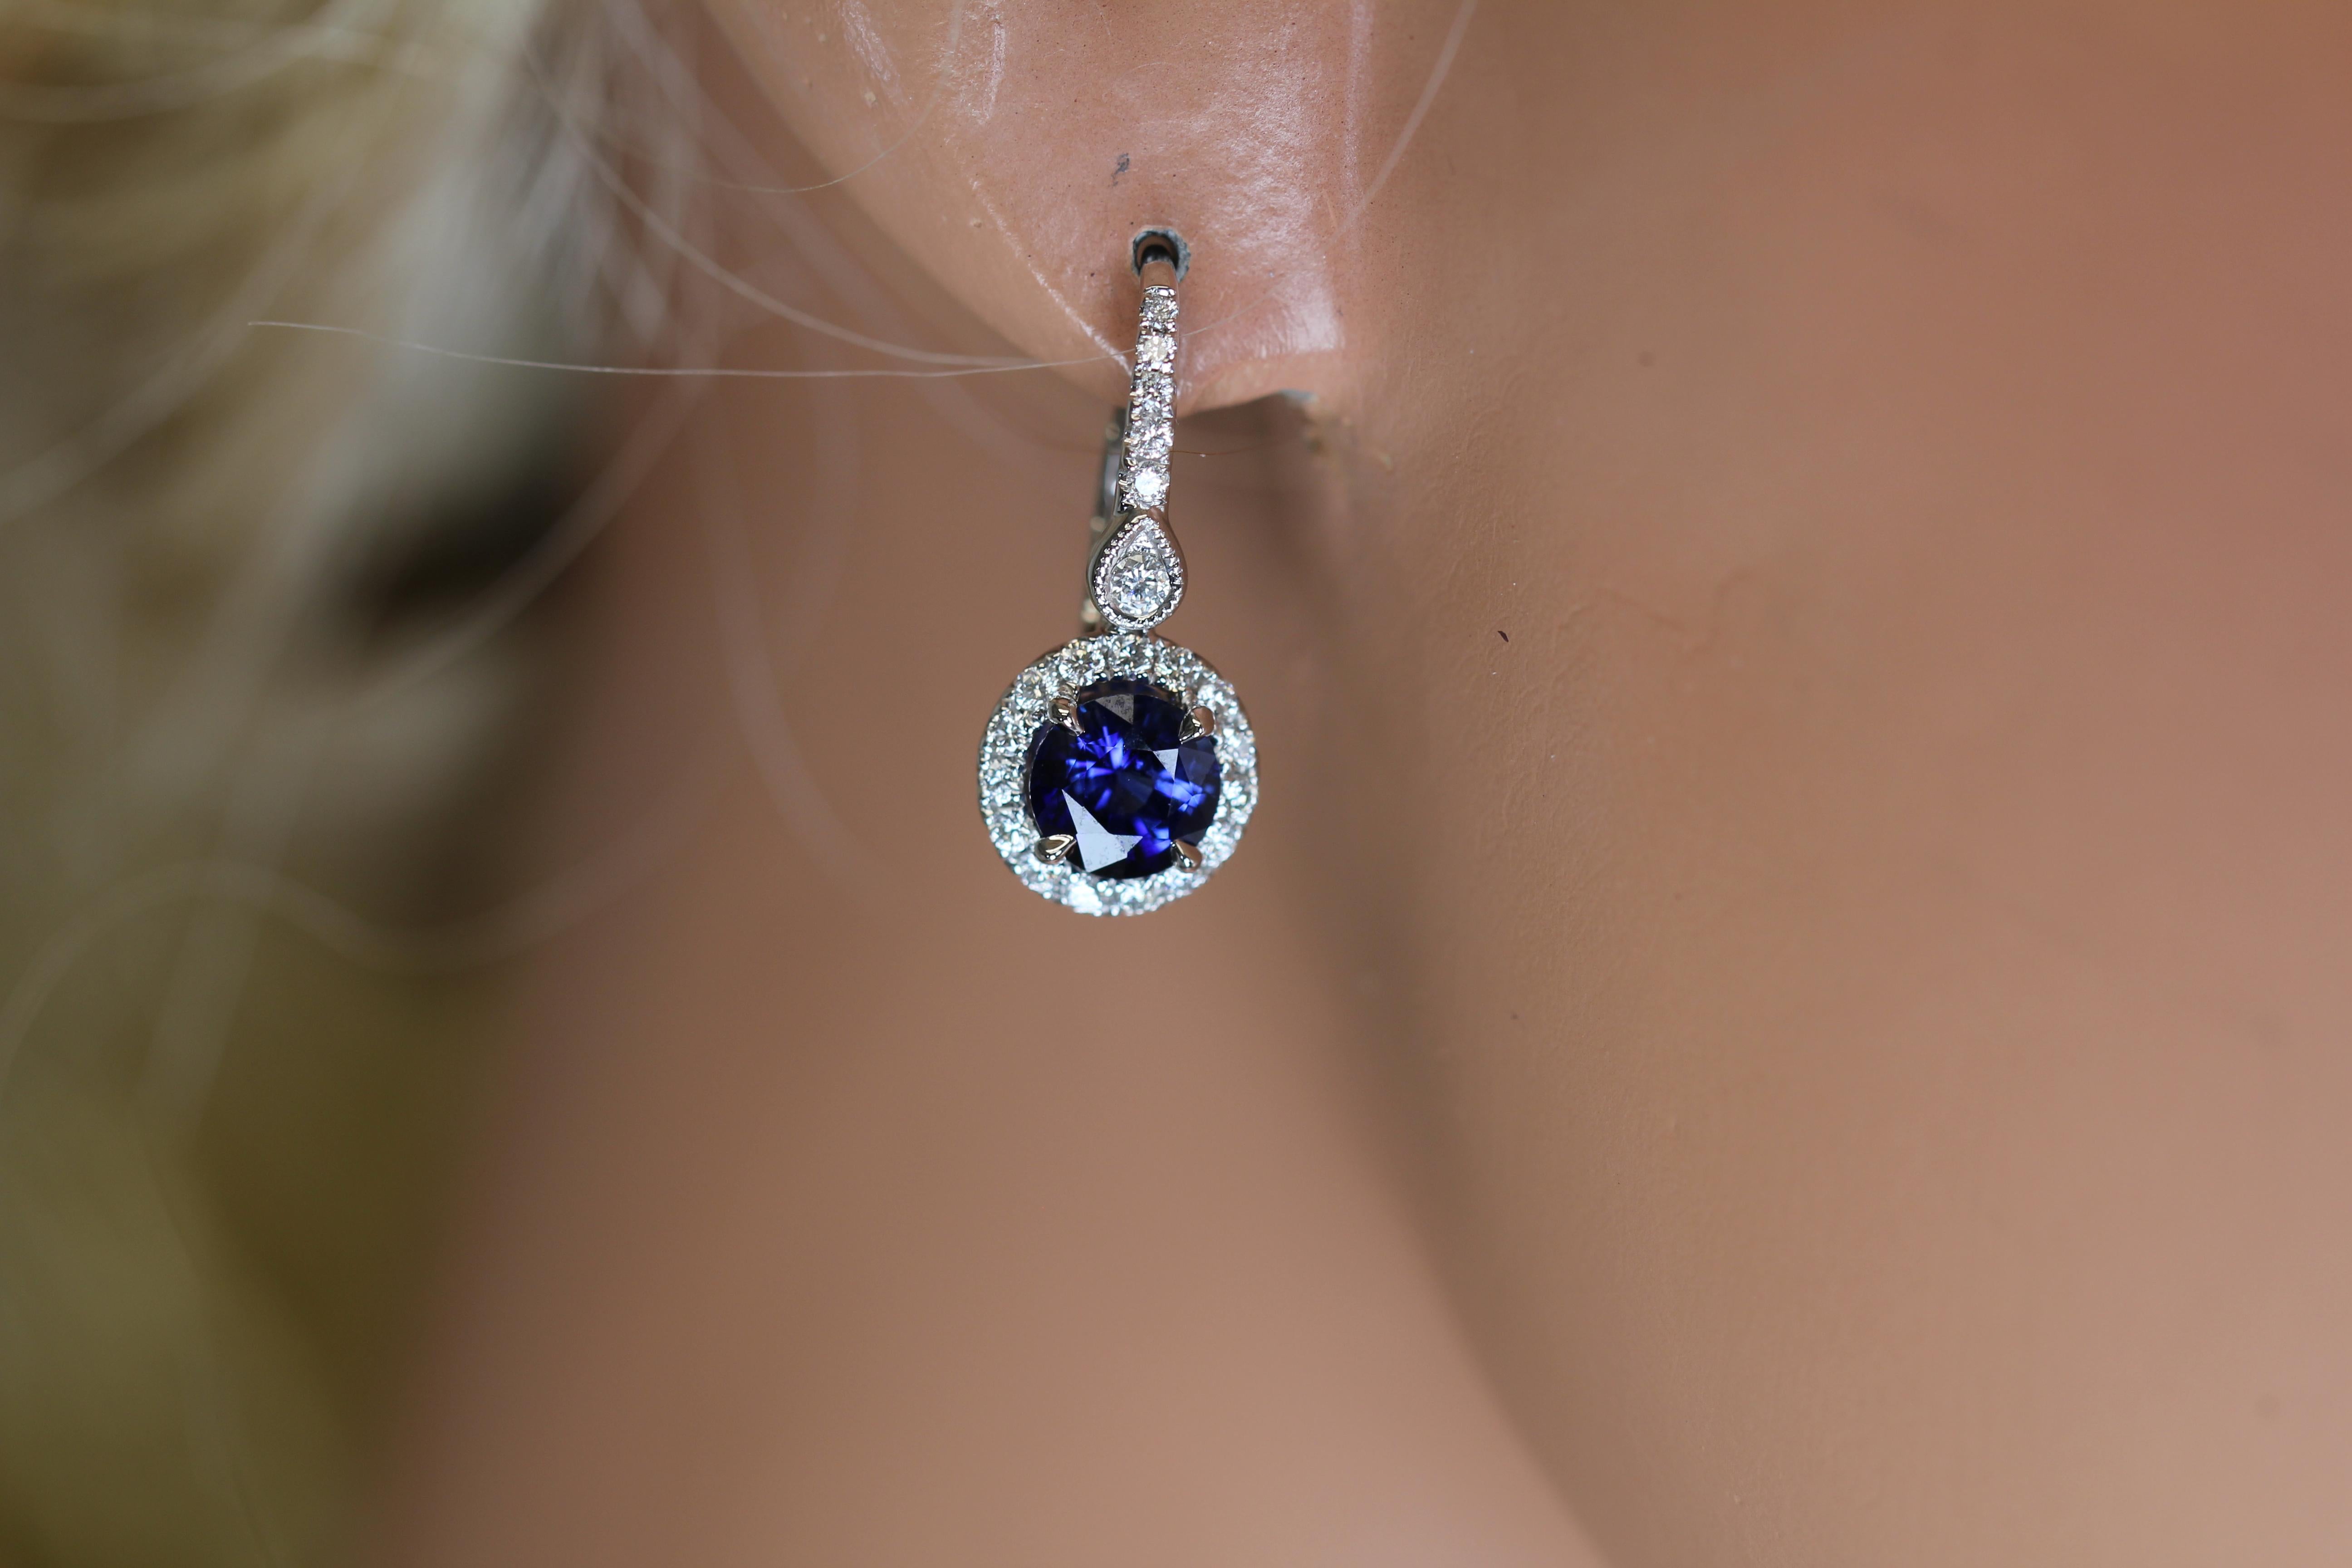 Contemporary 1.57 Carat Round Vivid Blue Sapphire and 0.50 Ct Diamond Earring in 14W ref1900 For Sale